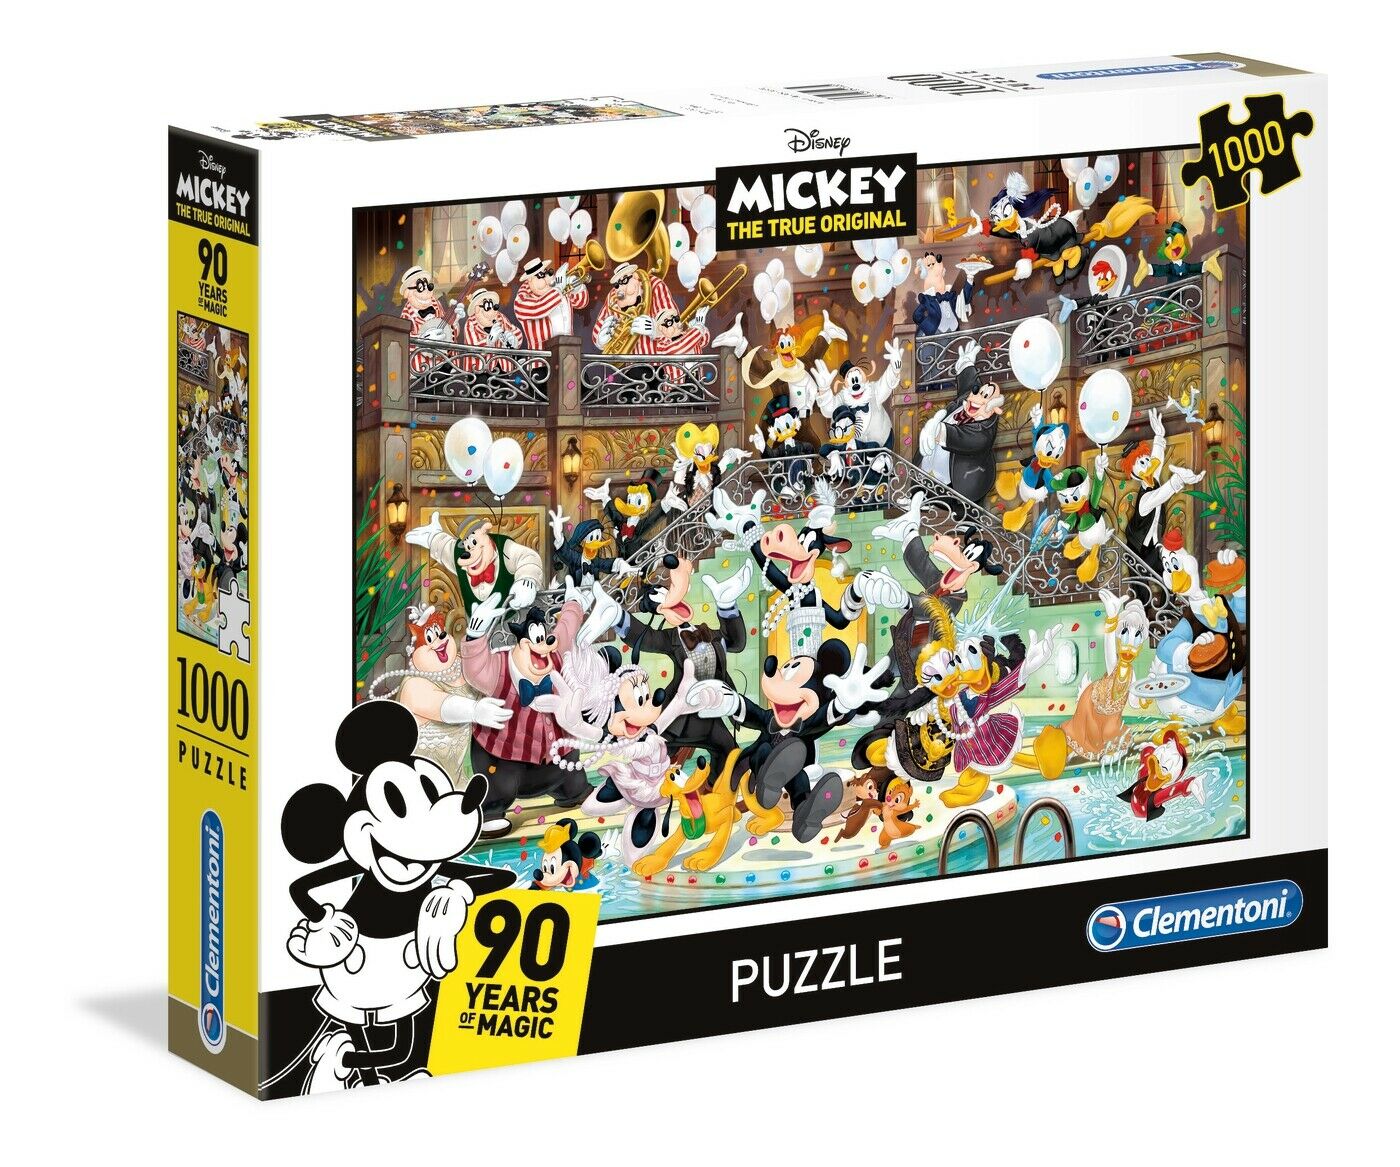 Puzzle 90 Jahre Mickey 1000 Puzzleteile